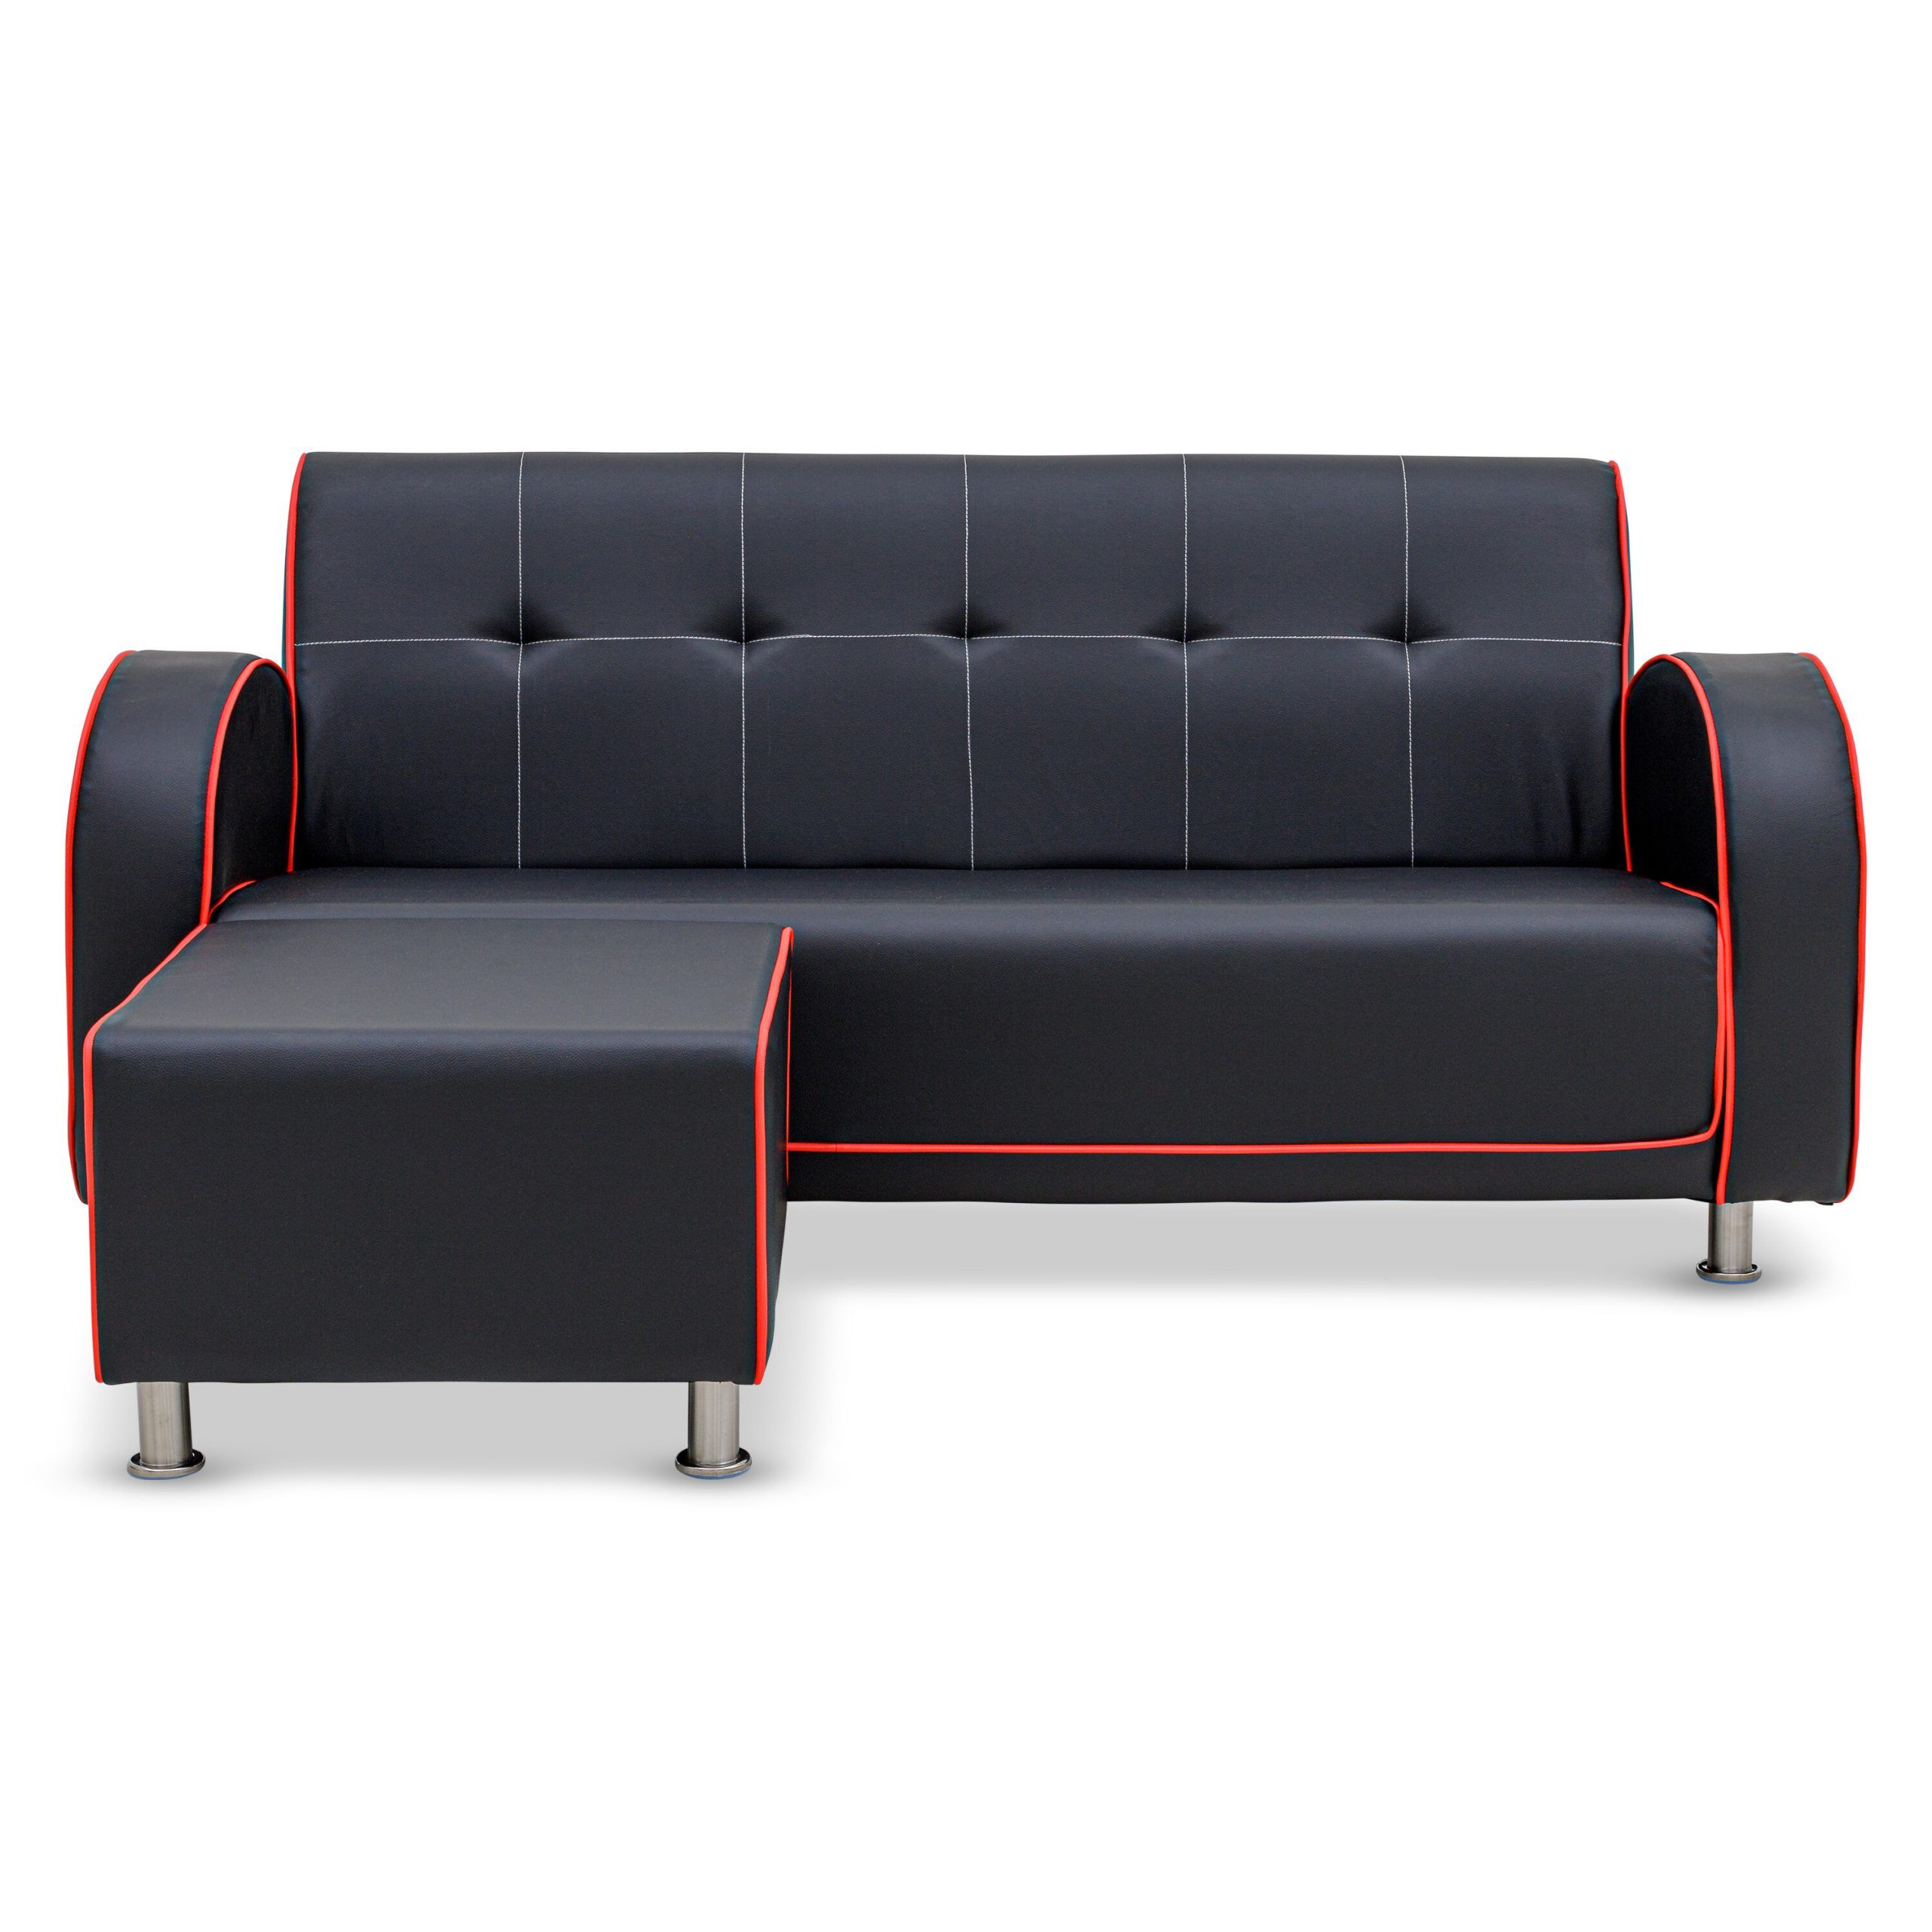 Lava 3 Seater Faux Leather Sofa With Ottoman | Furniture & Home Décor |  Fortytwo Intended For 3 Seat L Shaped Sofas In Black (View 10 of 15)